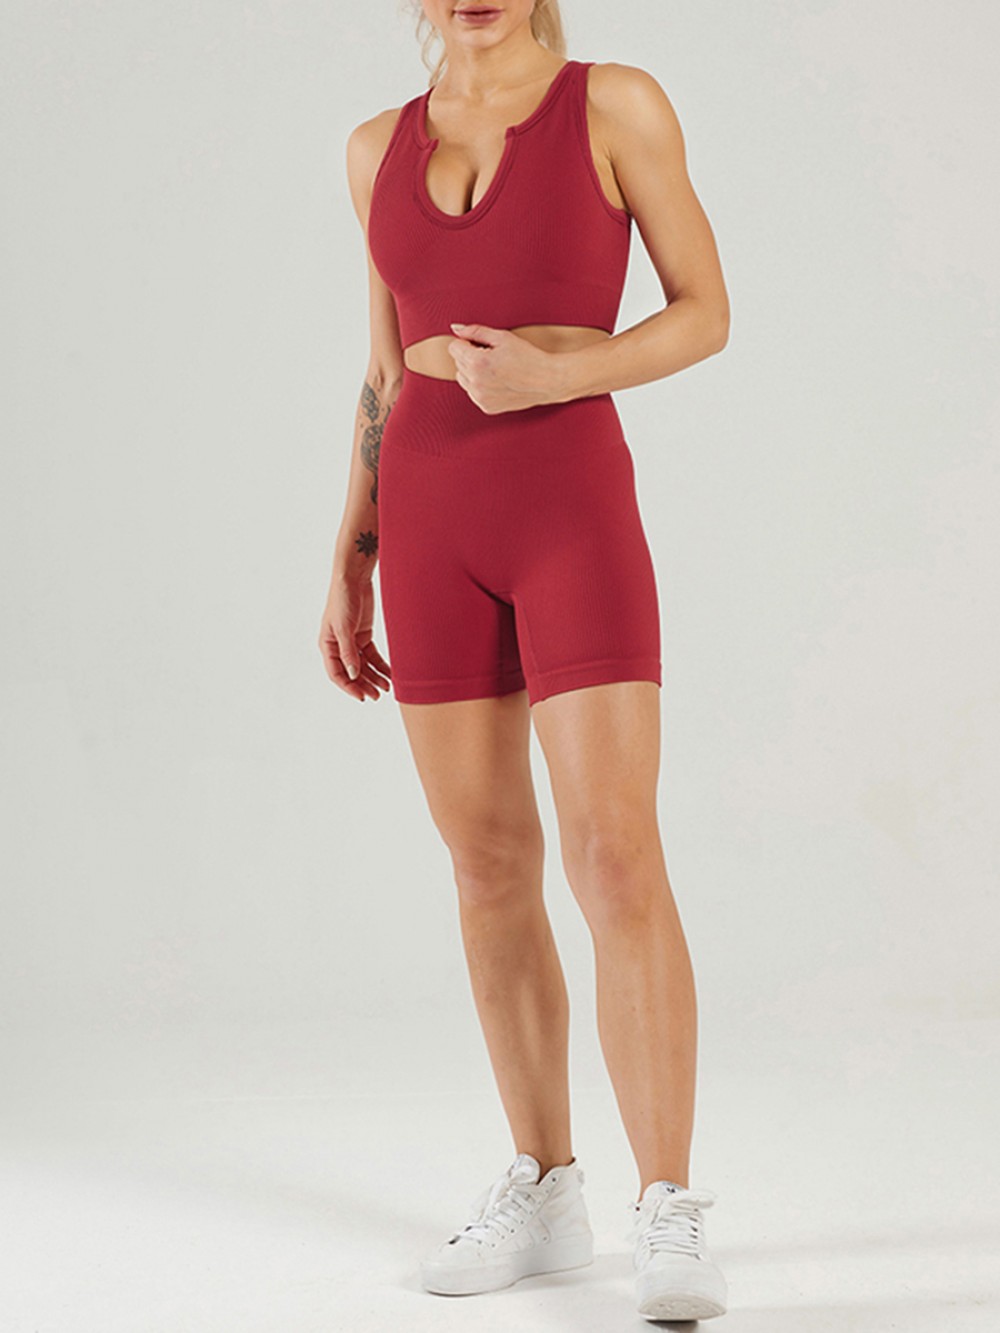 Wine Red High Waist Seamless Yoga Outfit Low-Cut Neck Online Wholesale